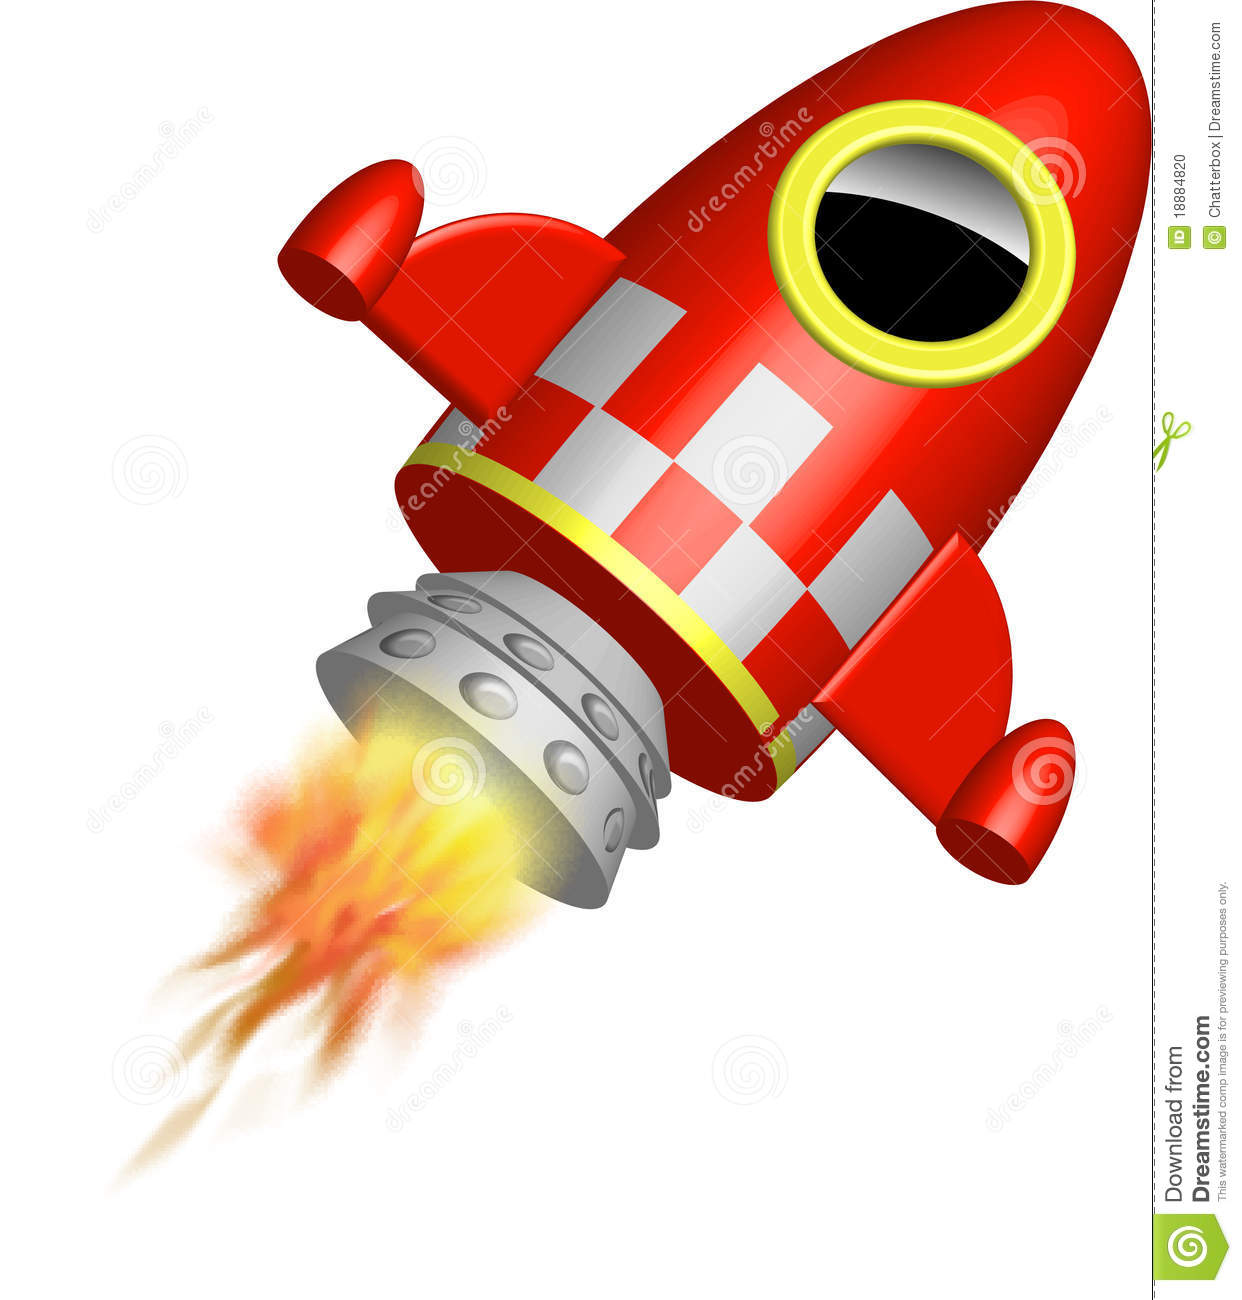 Red Little Rocket Ship With Flames Stock Photo   Image  18884820